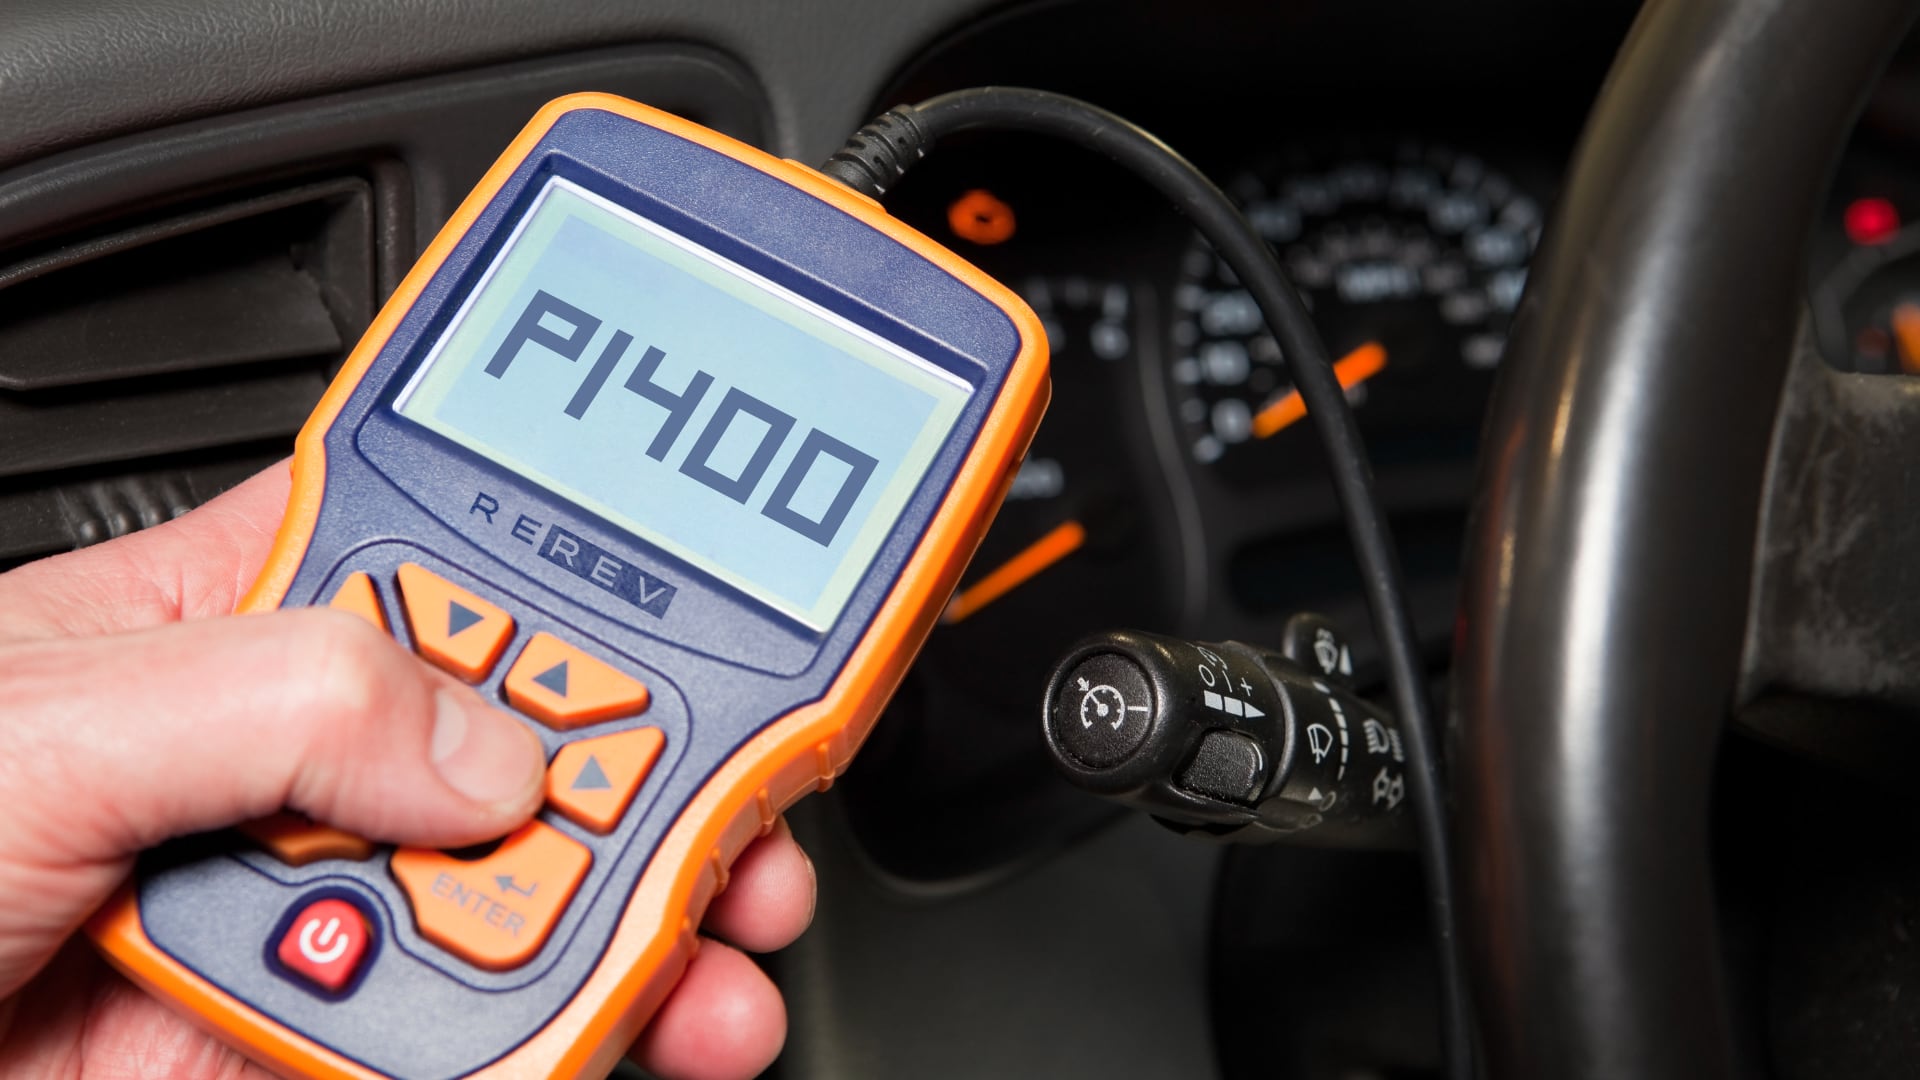 A person is holding a py400 odometer in a car.